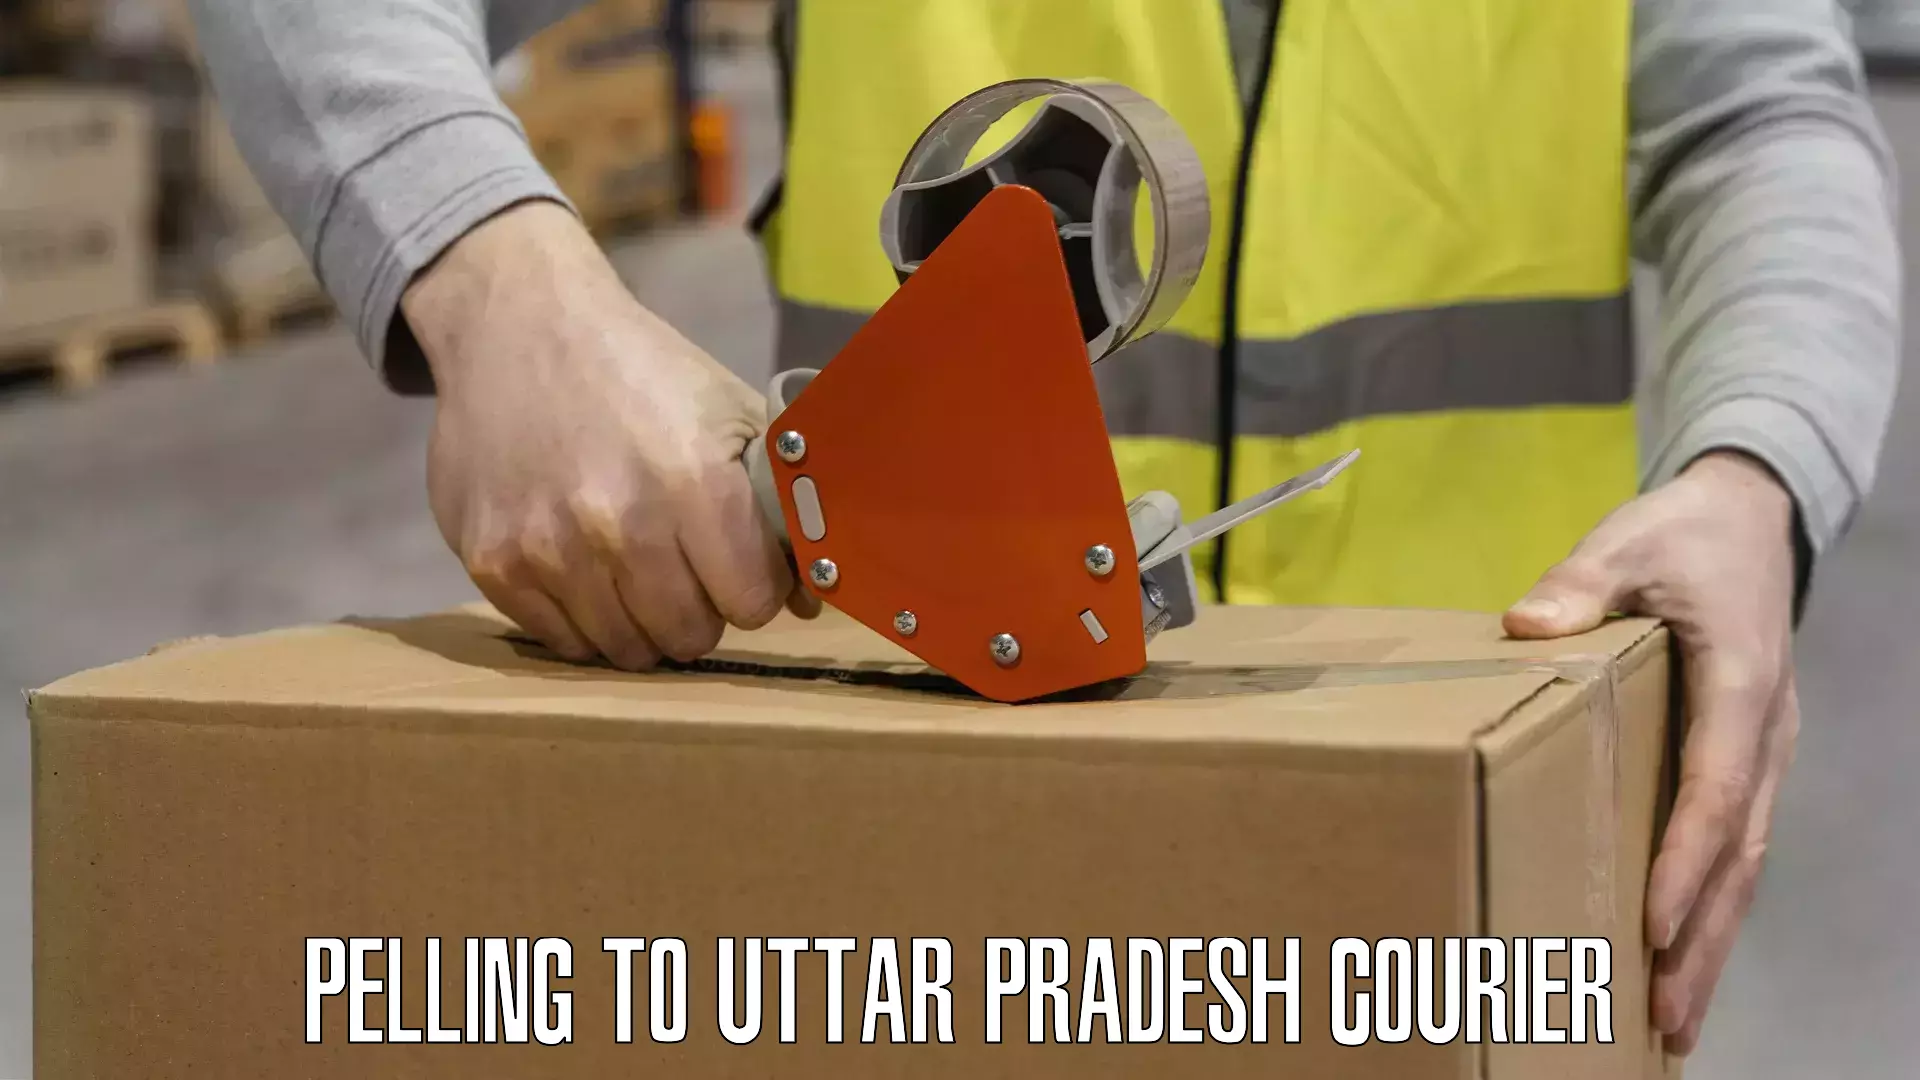 State-of-the-art courier technology Pelling to Uttar Pradesh